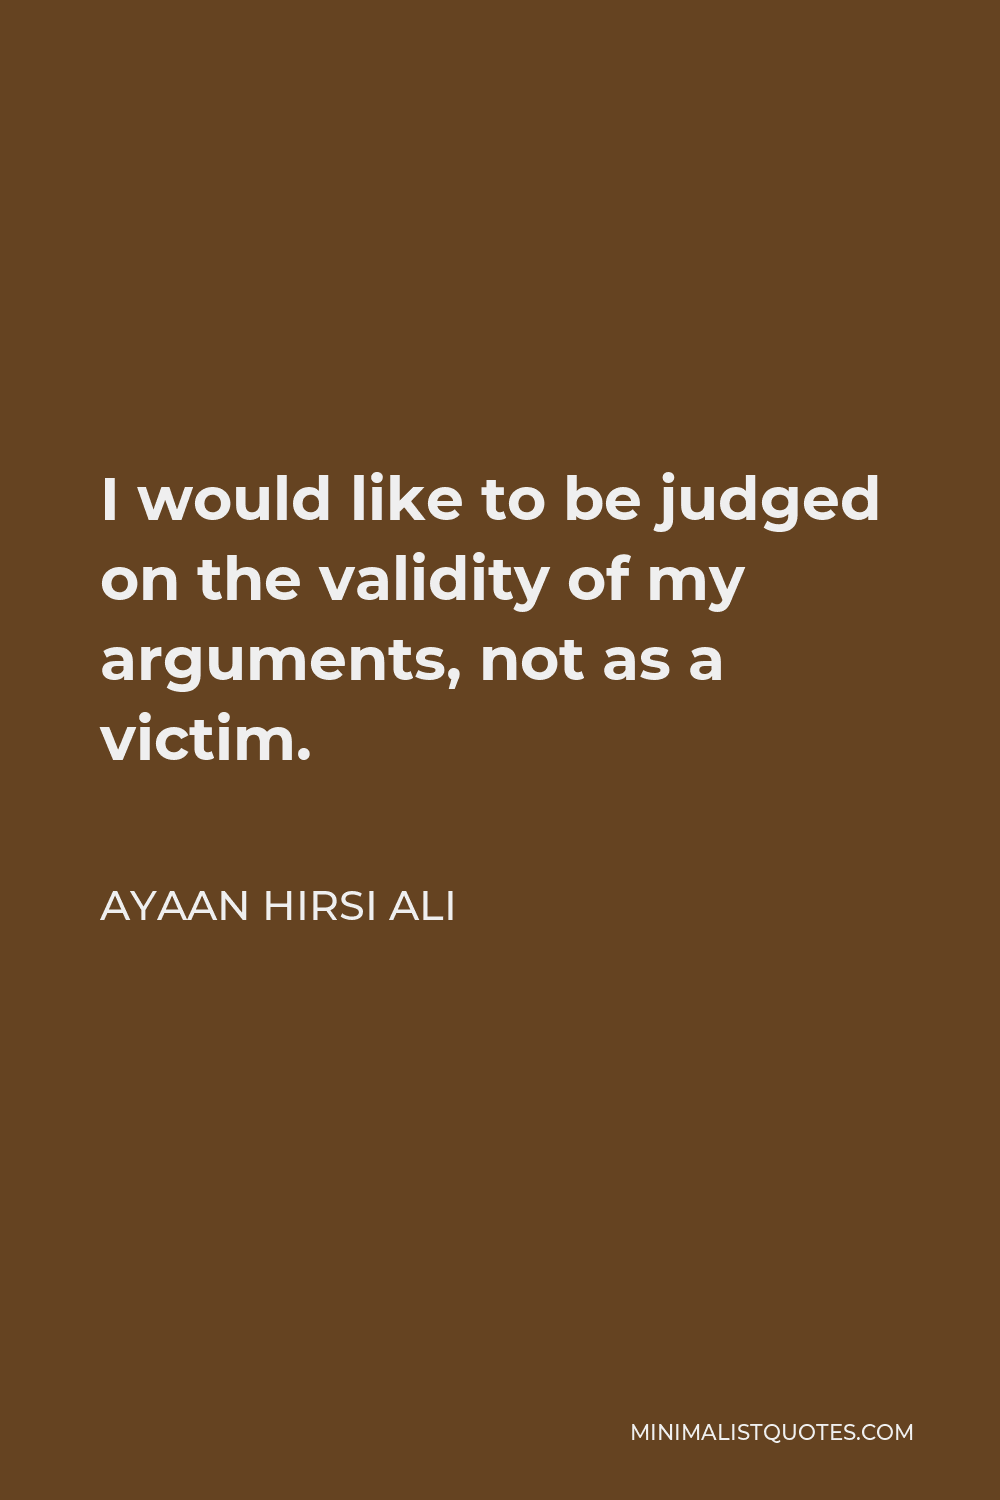 Ayaan Hirsi Ali Quote - I would like to be judged on the validity of my arguments, not as a victim.